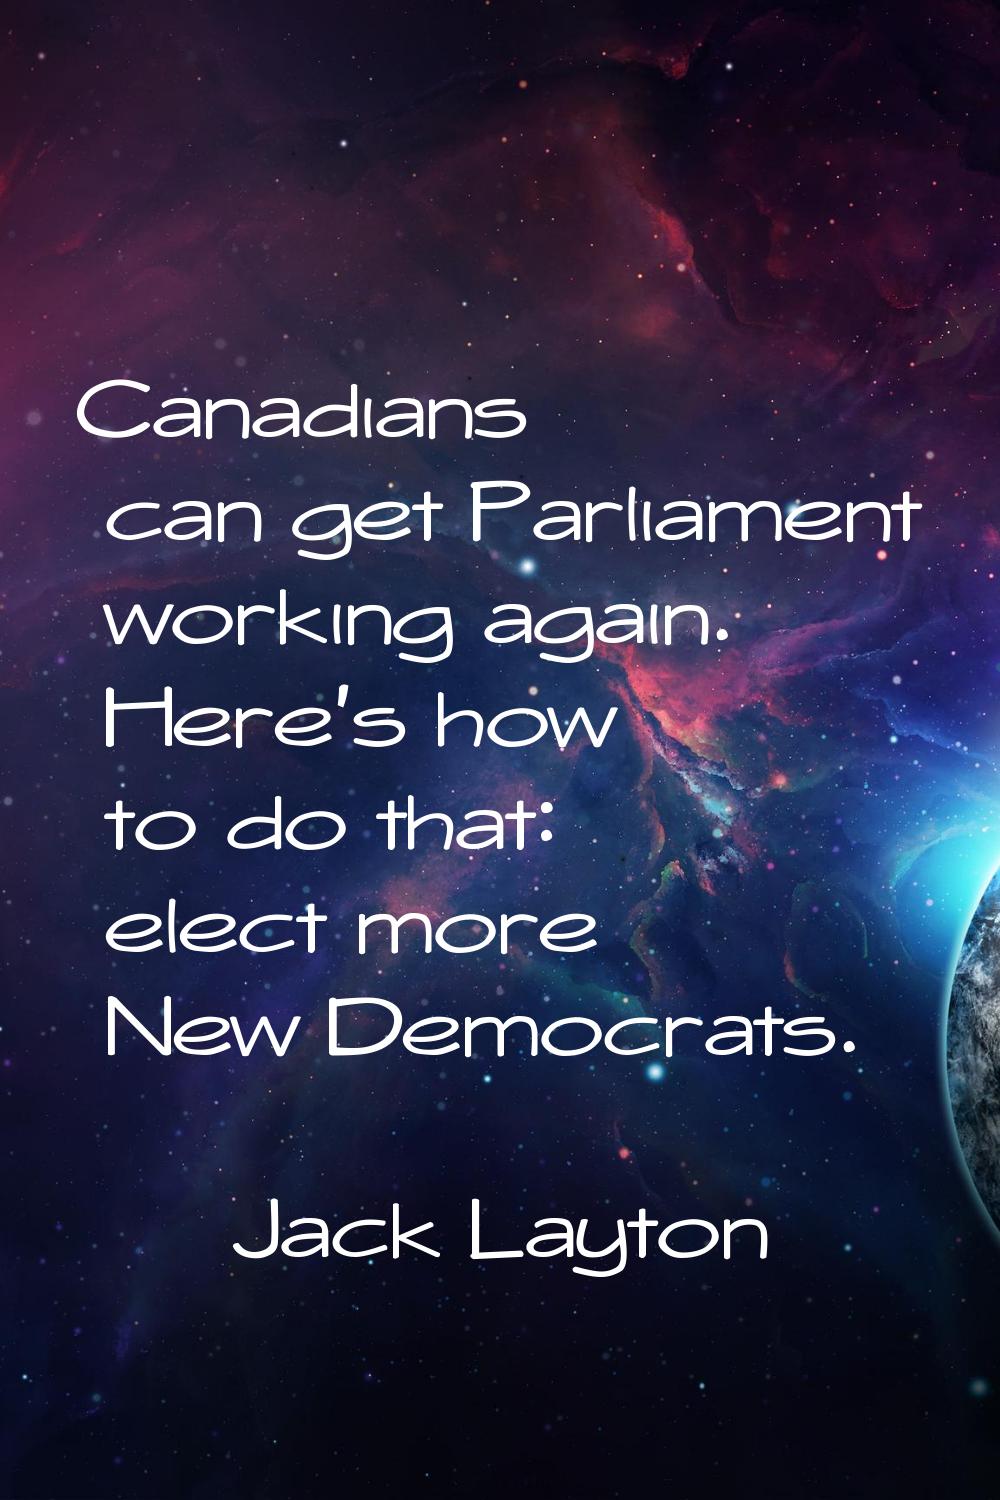 Canadians can get Parliament working again. Here's how to do that: elect more New Democrats.